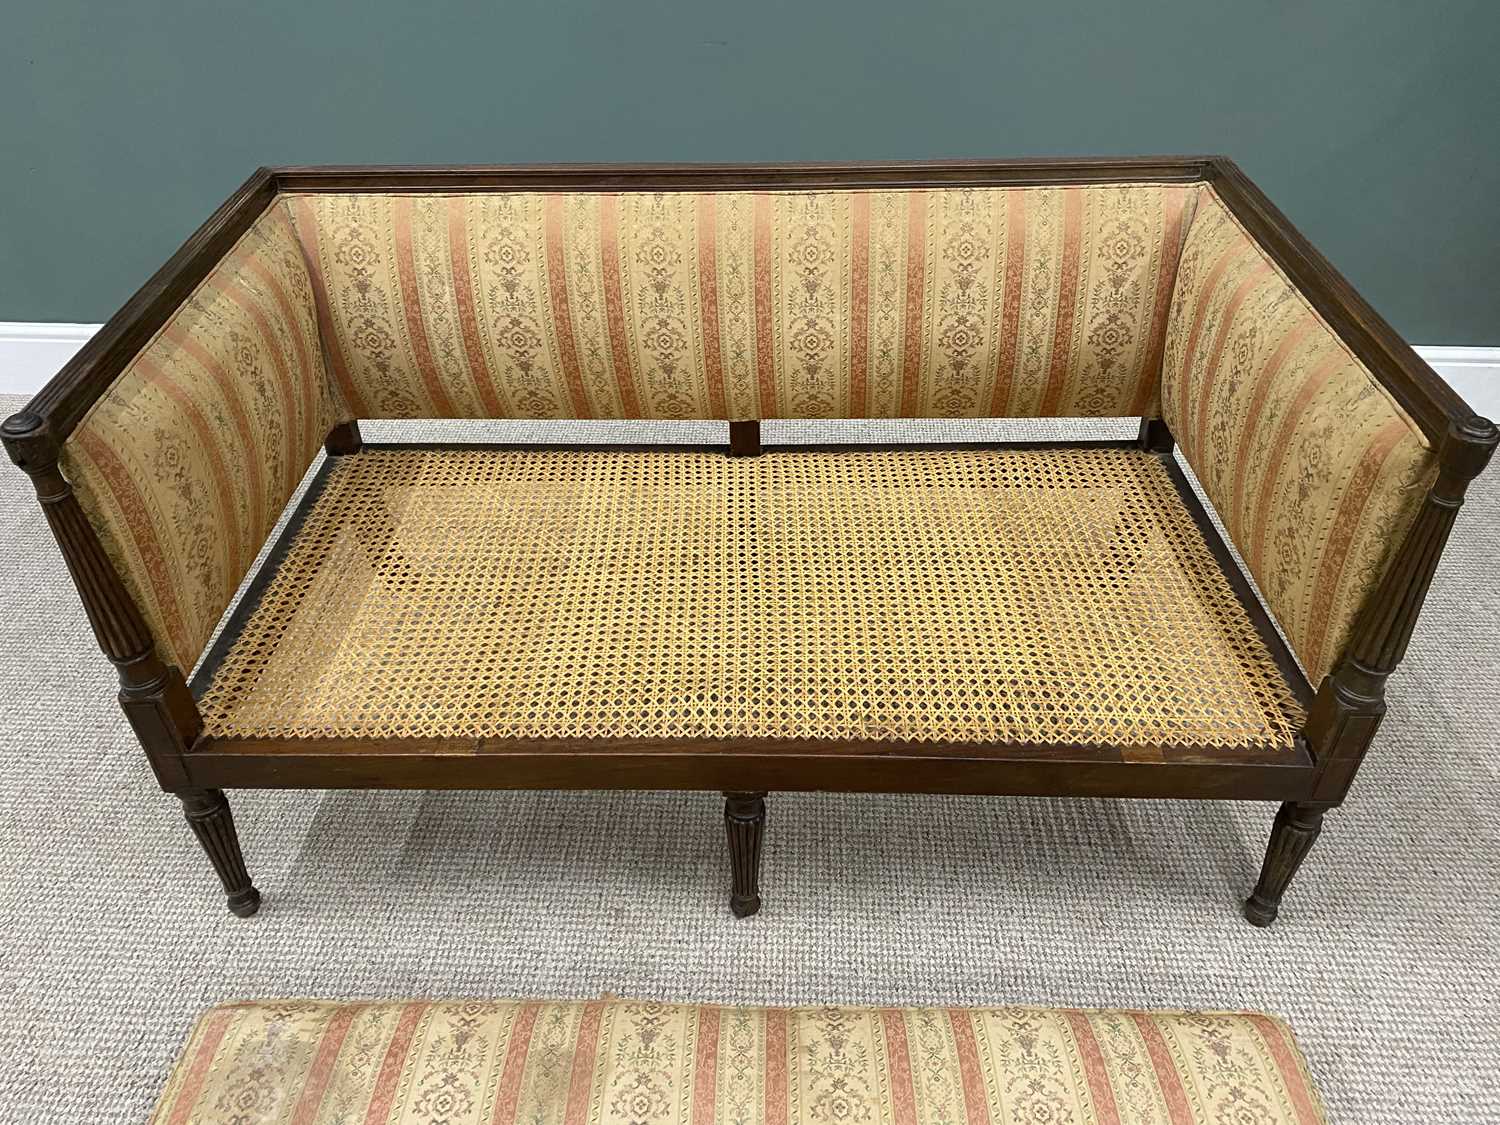 REGENCY MAHOGANY TWO SEATER SETTEE, classical stripe upholstery, loose lift seat pad, reeded top - Image 3 of 5